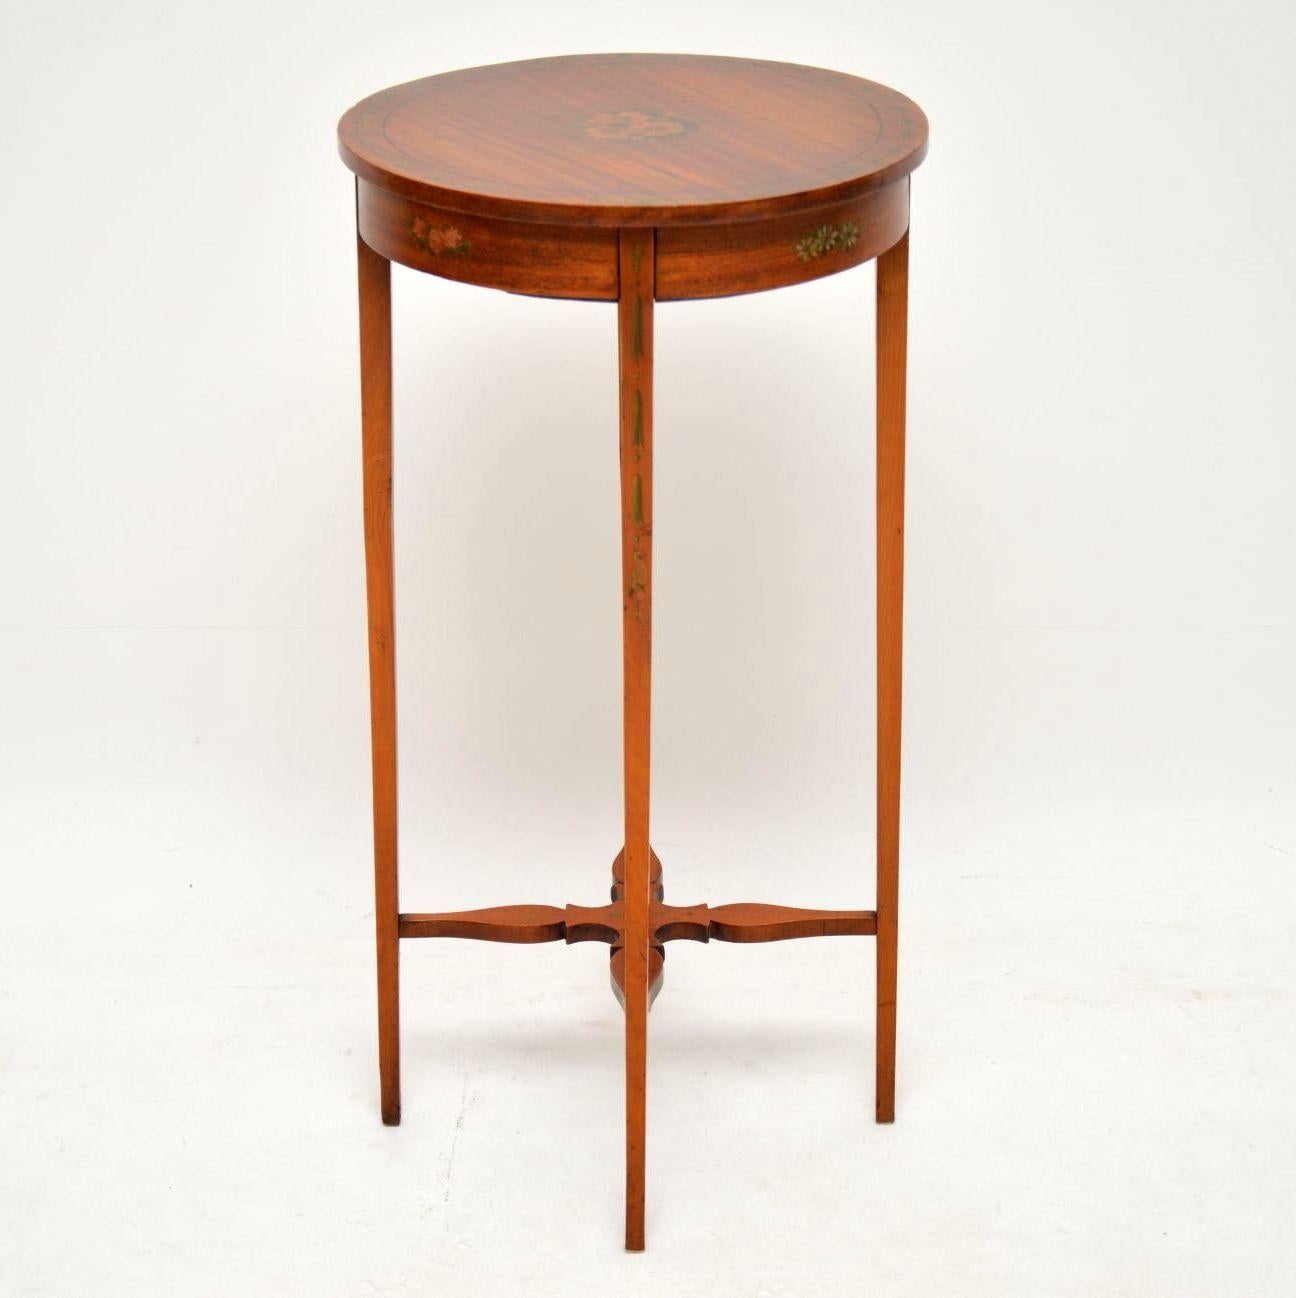 Antique Edwardian Painted Satin Wood Side Table (Englisch)